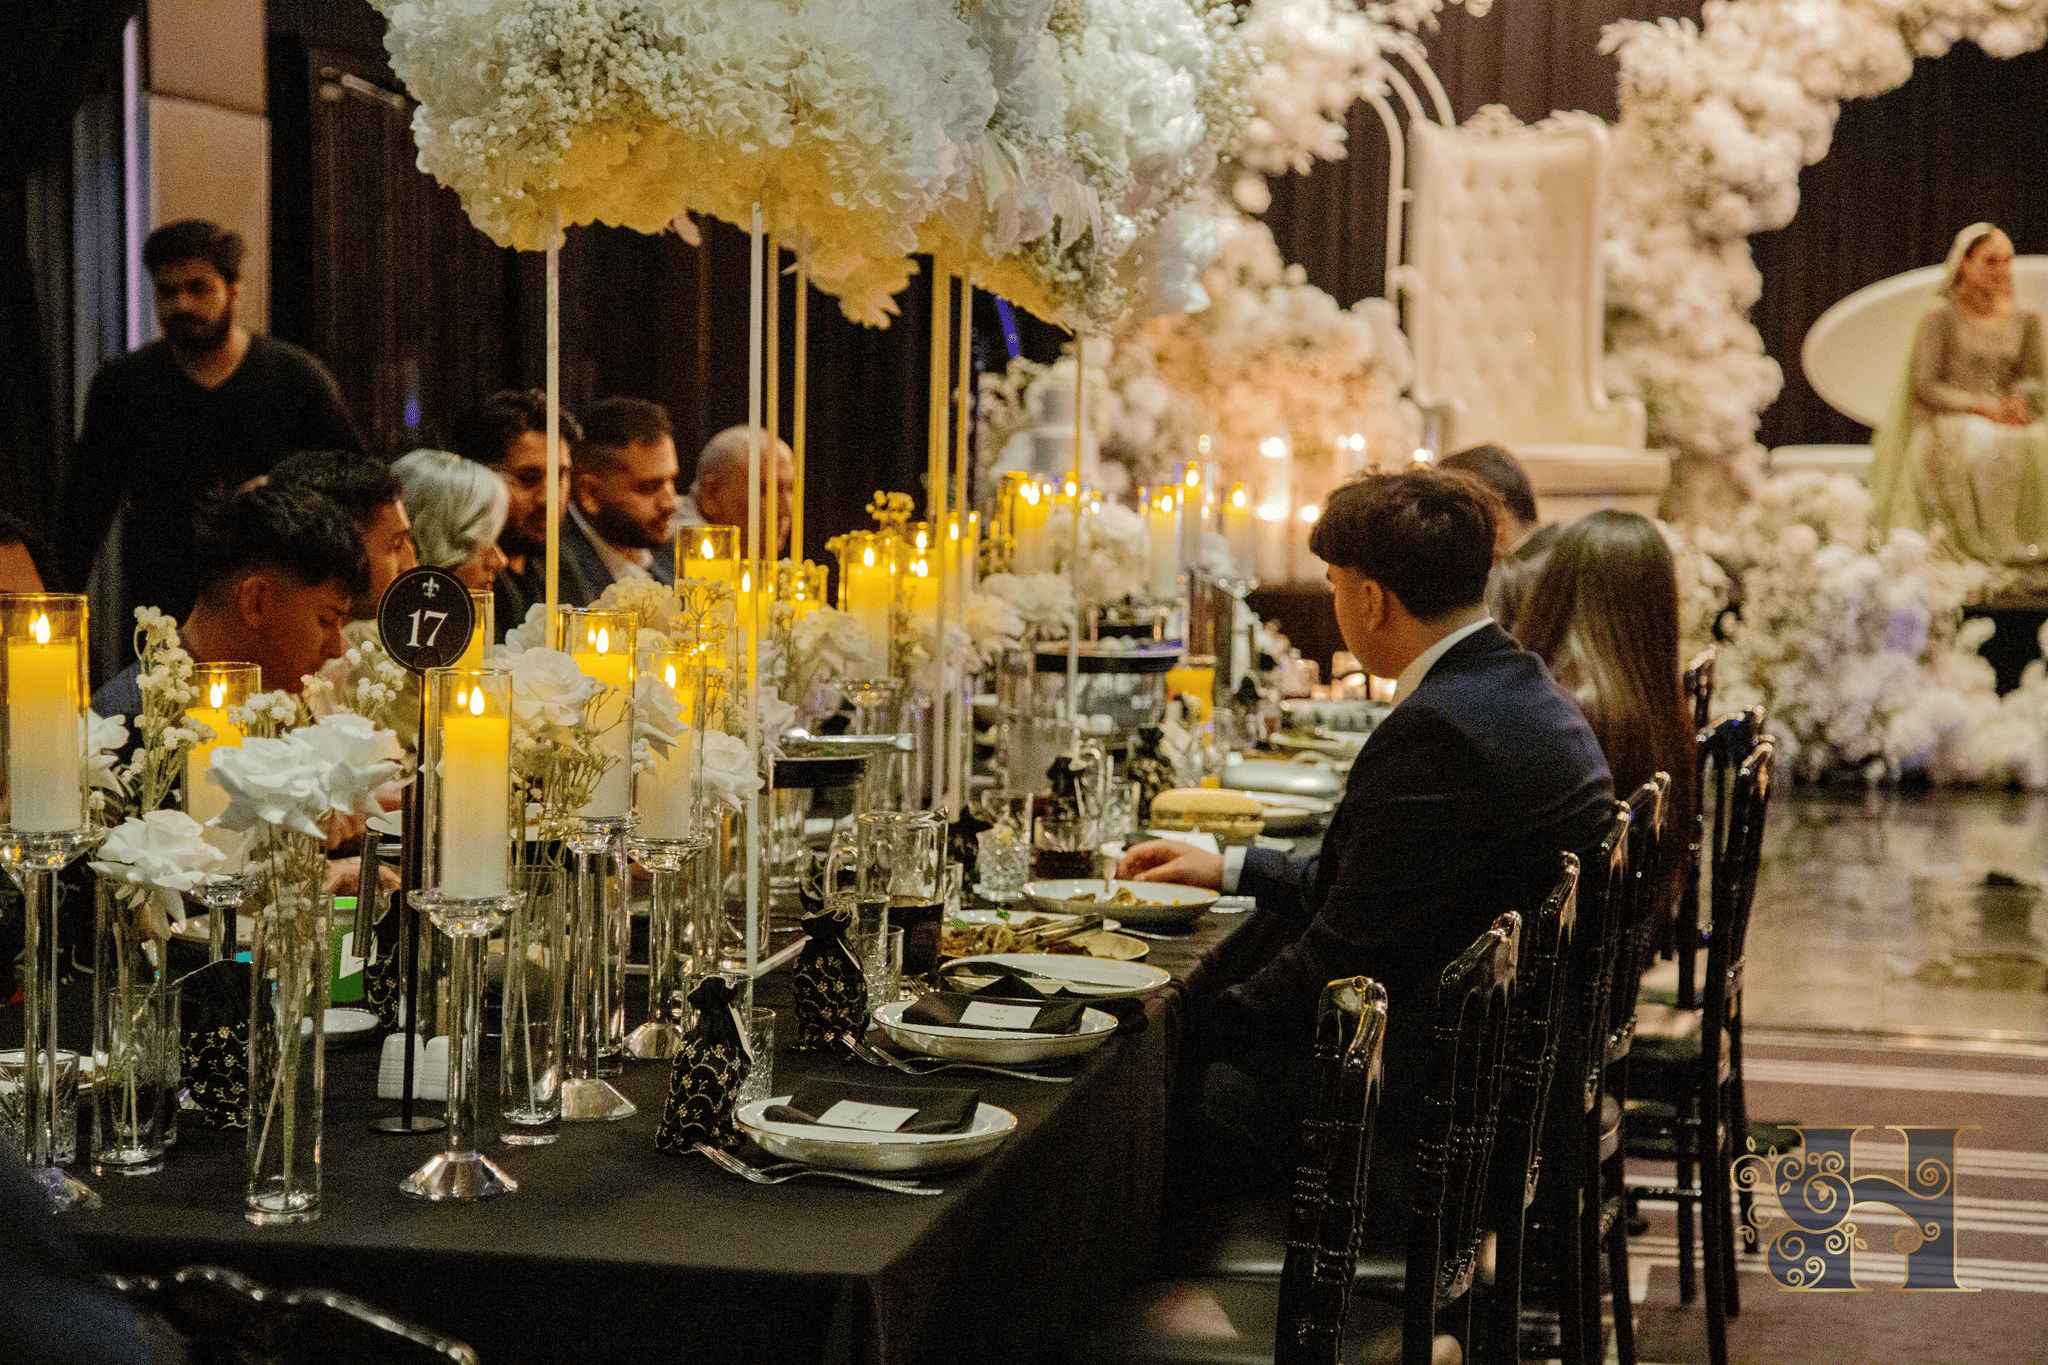 Group of people sitting at a table enjoying a plated-style dinner.